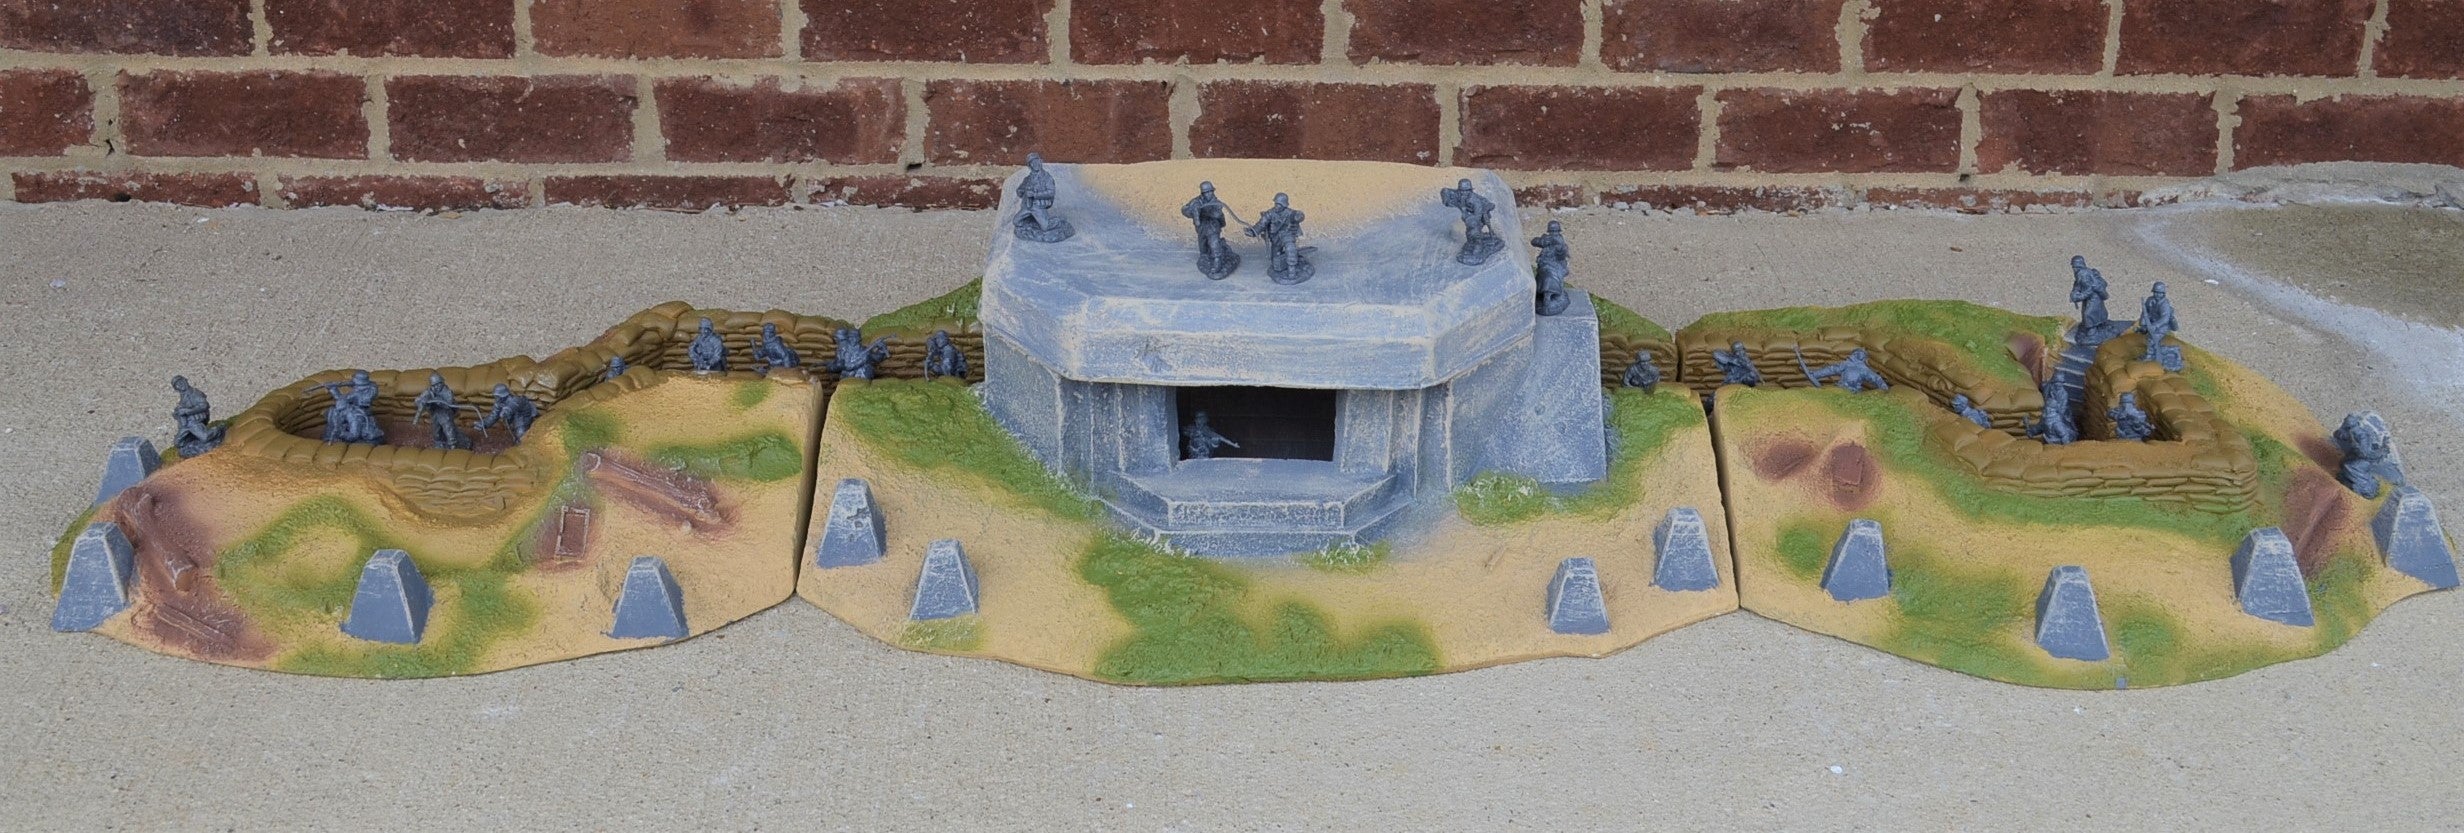 ATHERTON SCENICS PAINTED D-DAY GERMAN BEACH BUNKER - 9909-BBC